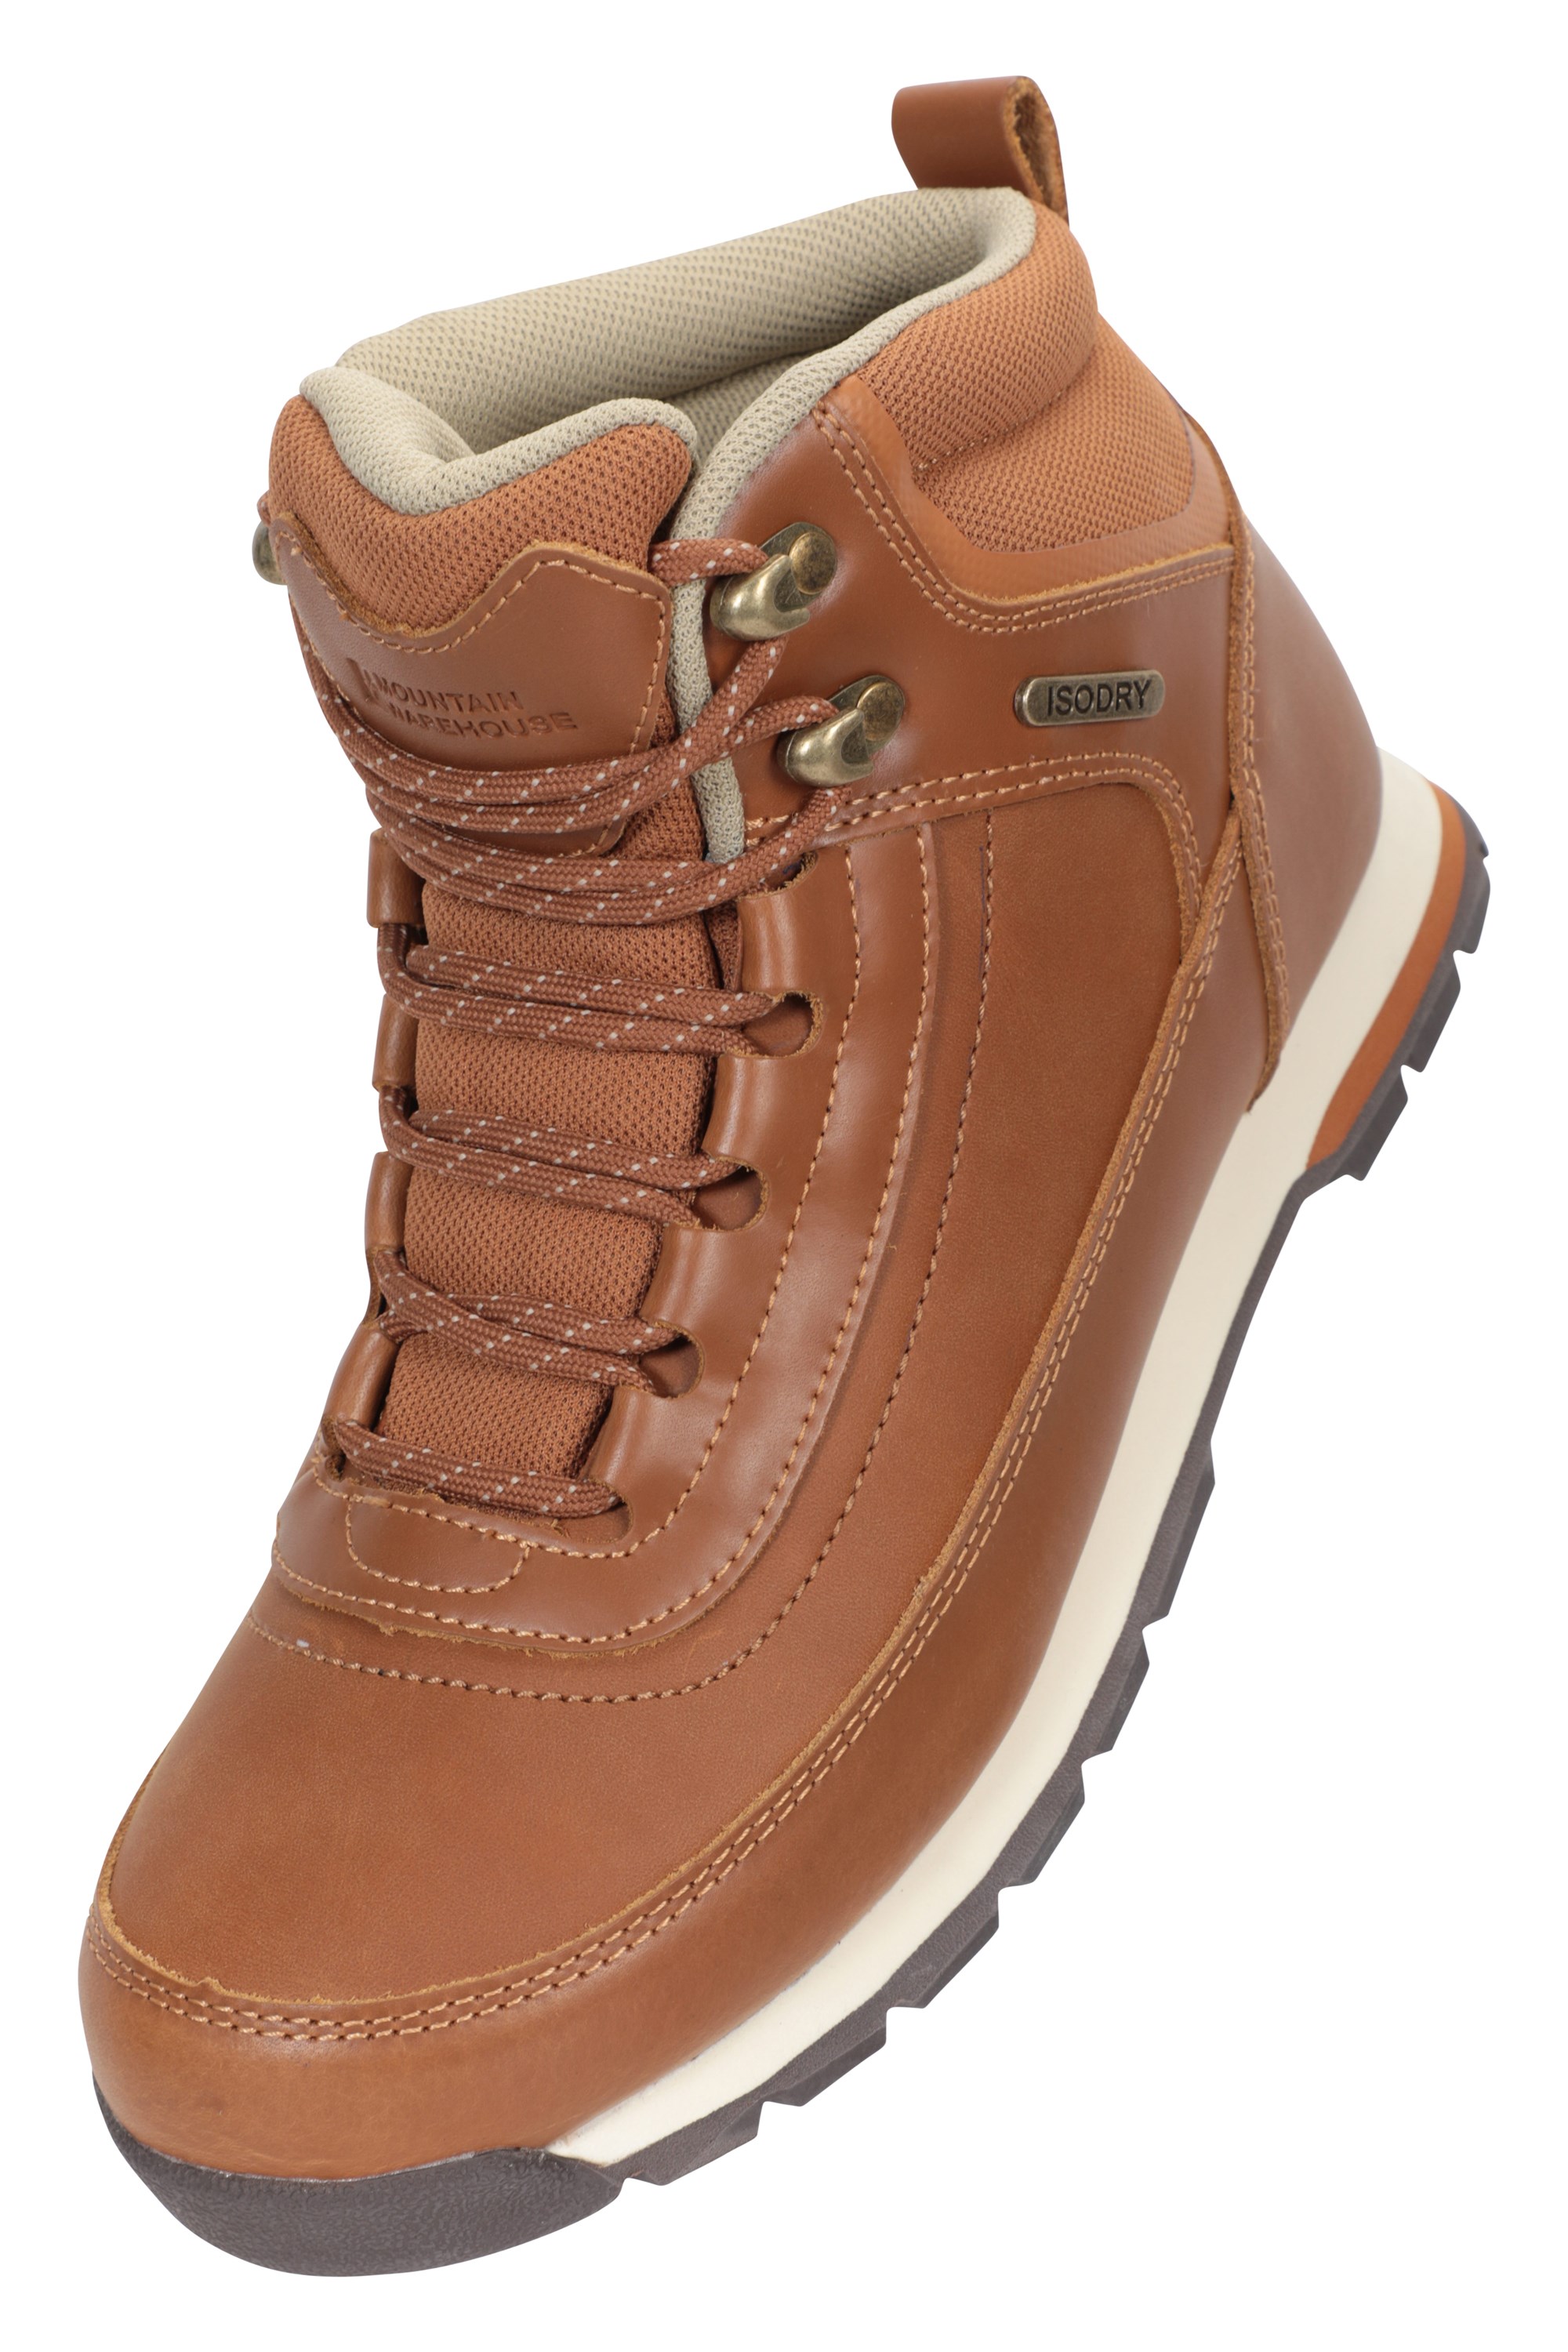 Mountain Warehouse Wms  Pilgrim Womens Leather Waterproof Outdoor Boot In Brown 